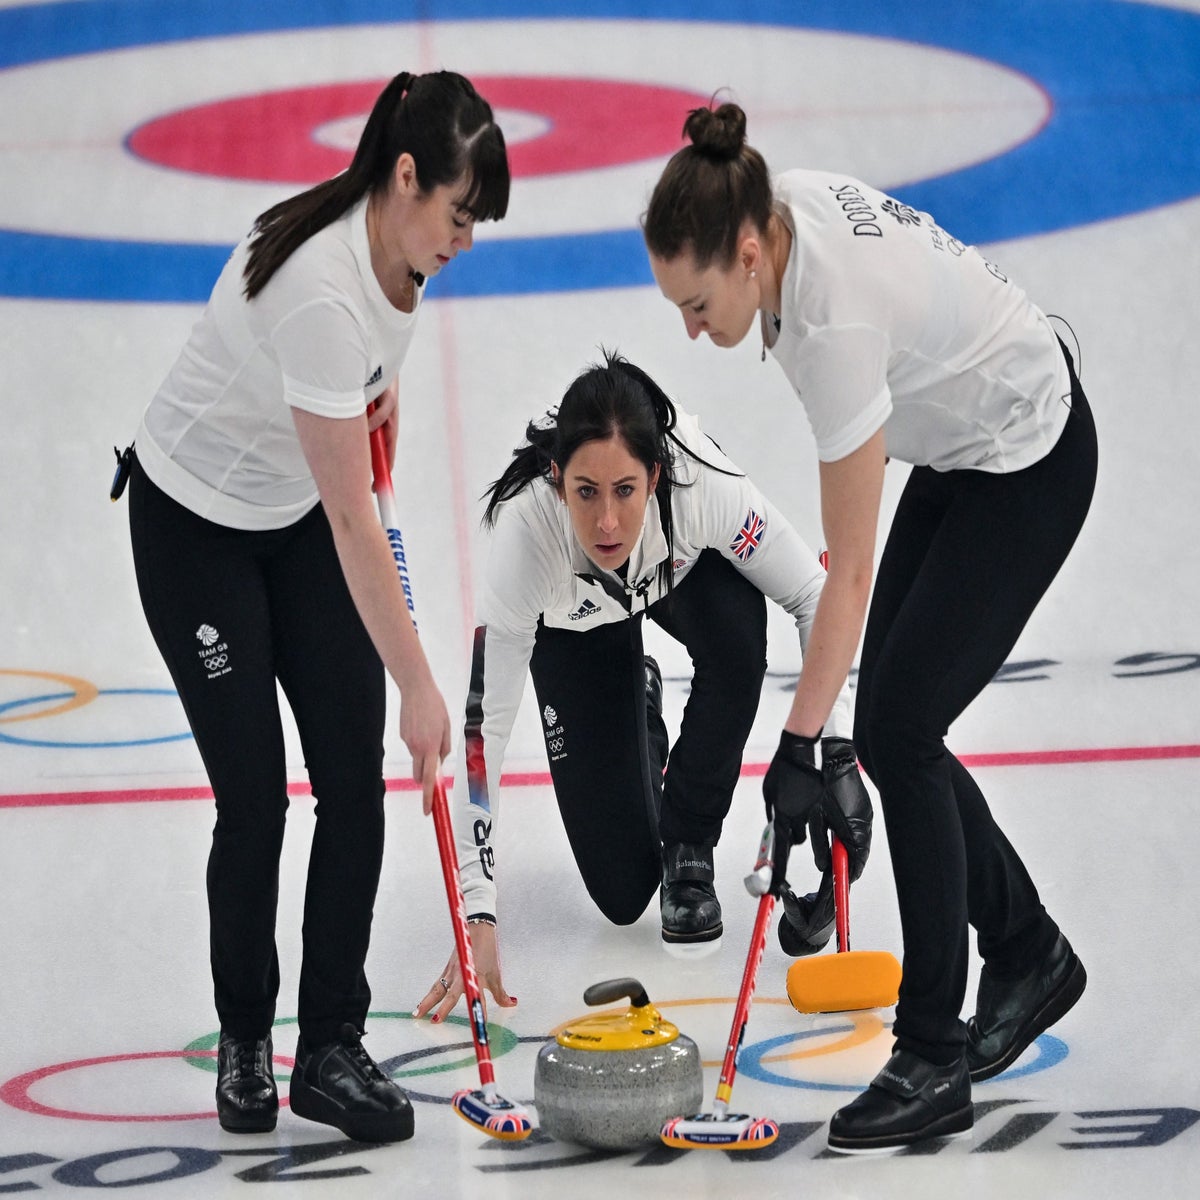 Eve Muirhead curses Team GB's luck after defeat leaves curling medal hopes  on brink